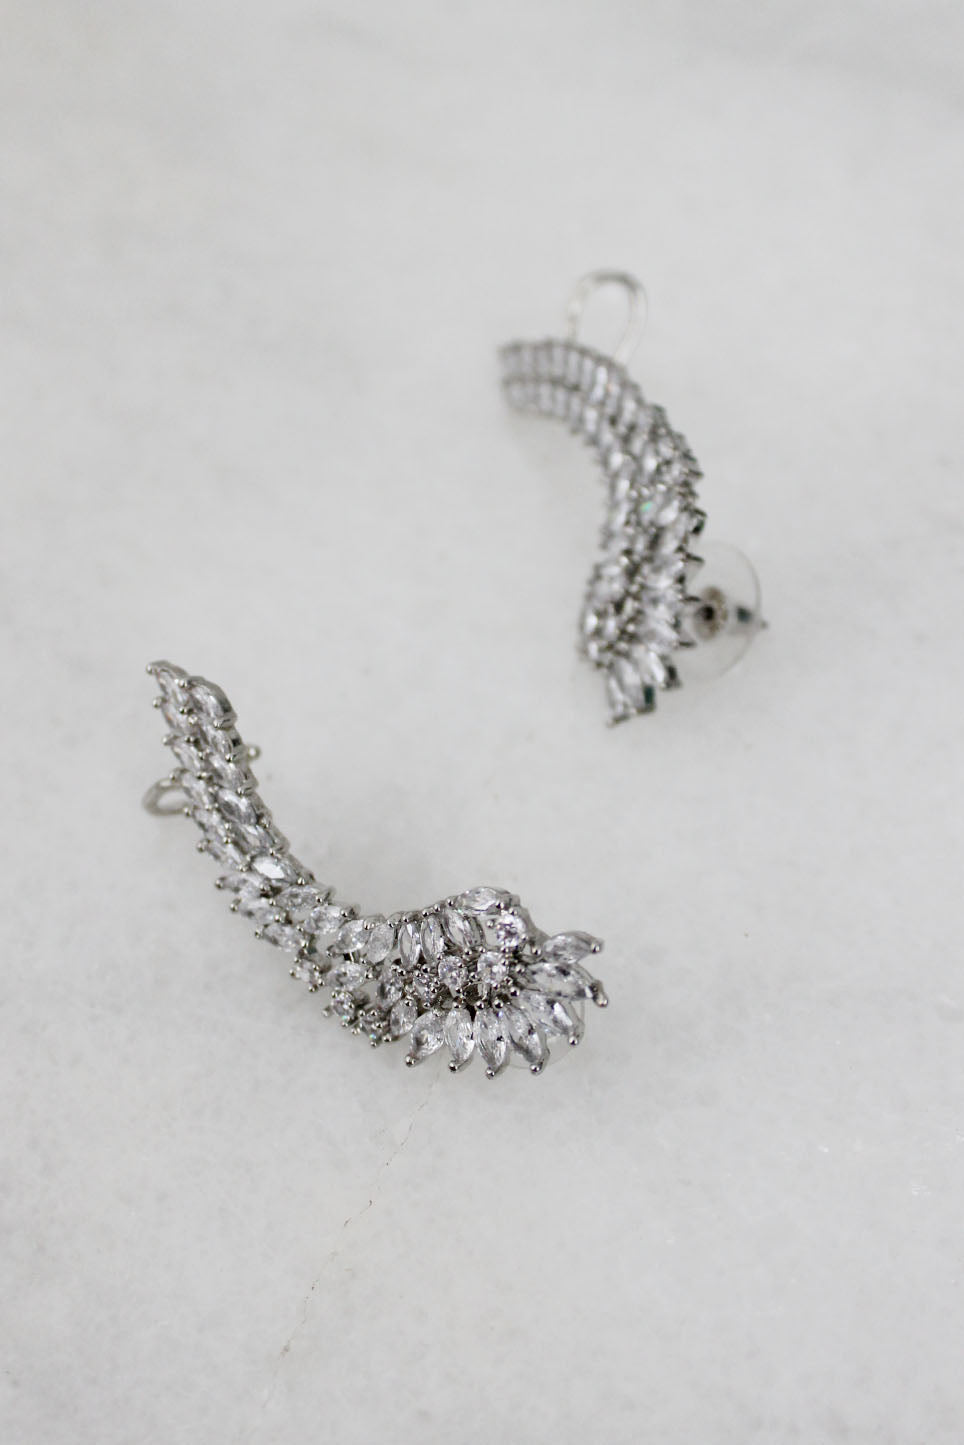 detail view of christian siriano angel wing ear climbers. features post with a push back closure and a hook at the top to loop around the ear. marquis cut and round cut cubic zirconia